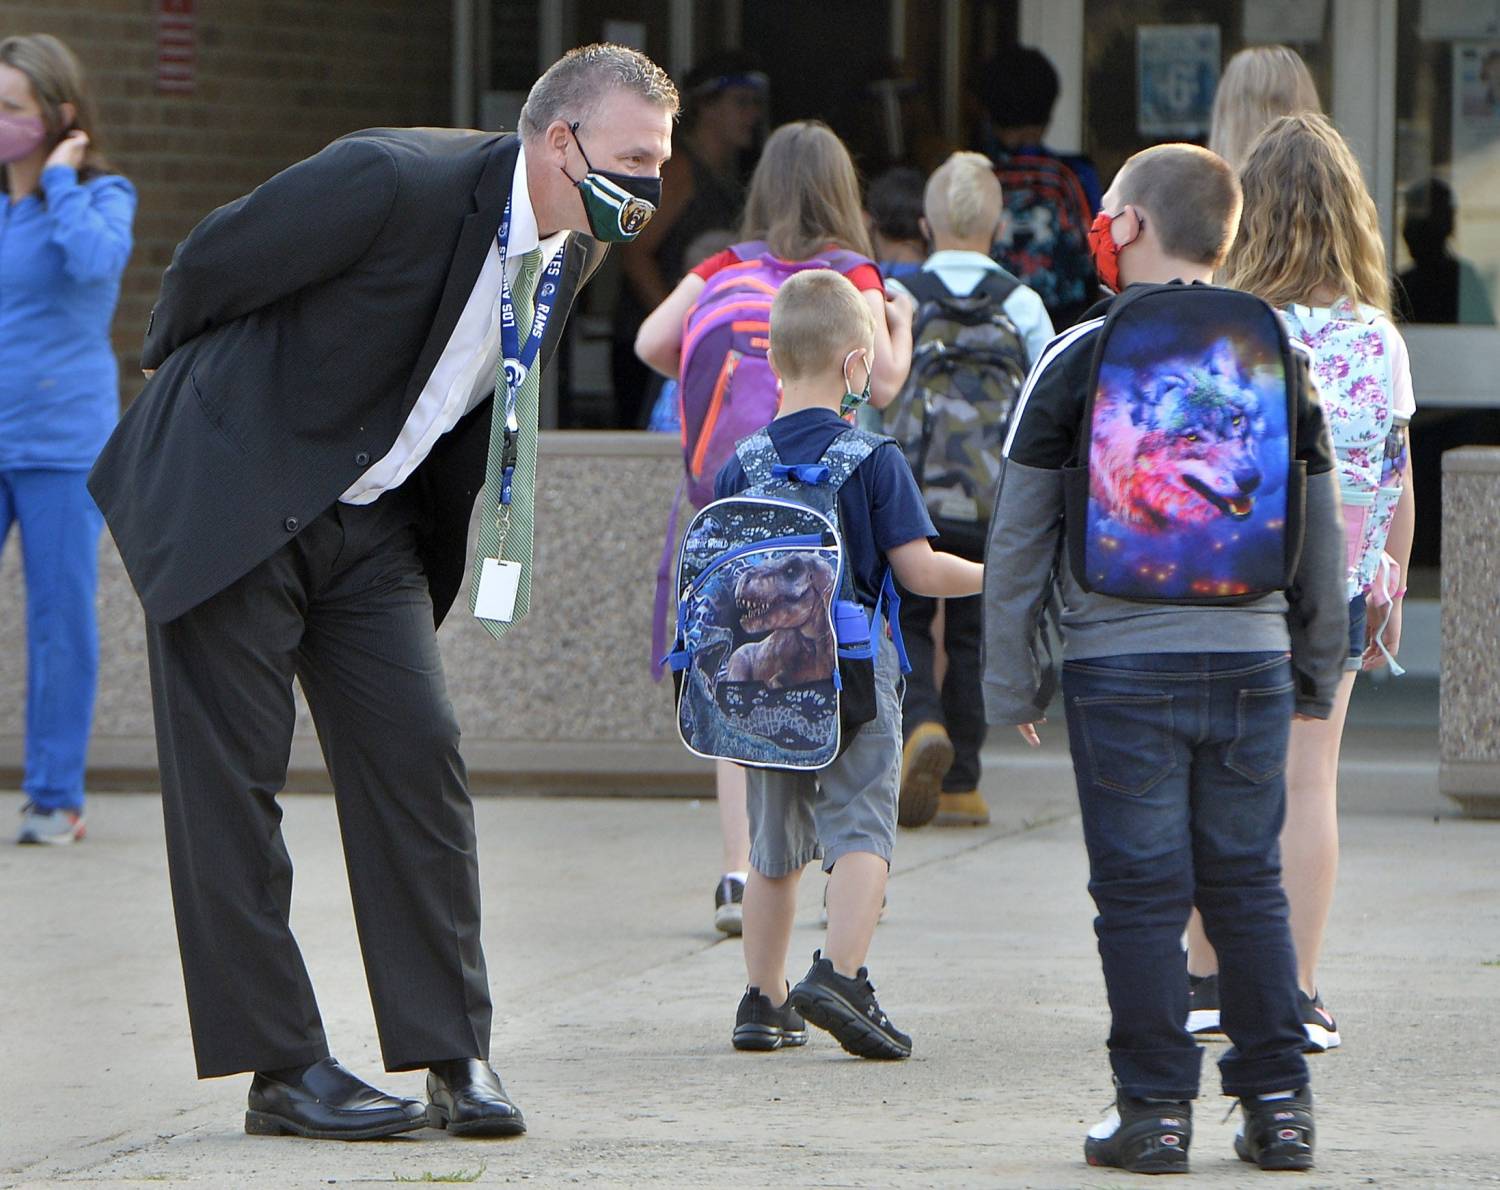 Union City Area School District Superintendent Matt Bennett, left, greets Union City Area Elementary School students on August 25, 2020, the first day of school, in Union City. Staff, students and parents are adjusting to a new routine due to the COVID-19 coronavirus pandemic.P2backtoschool082520